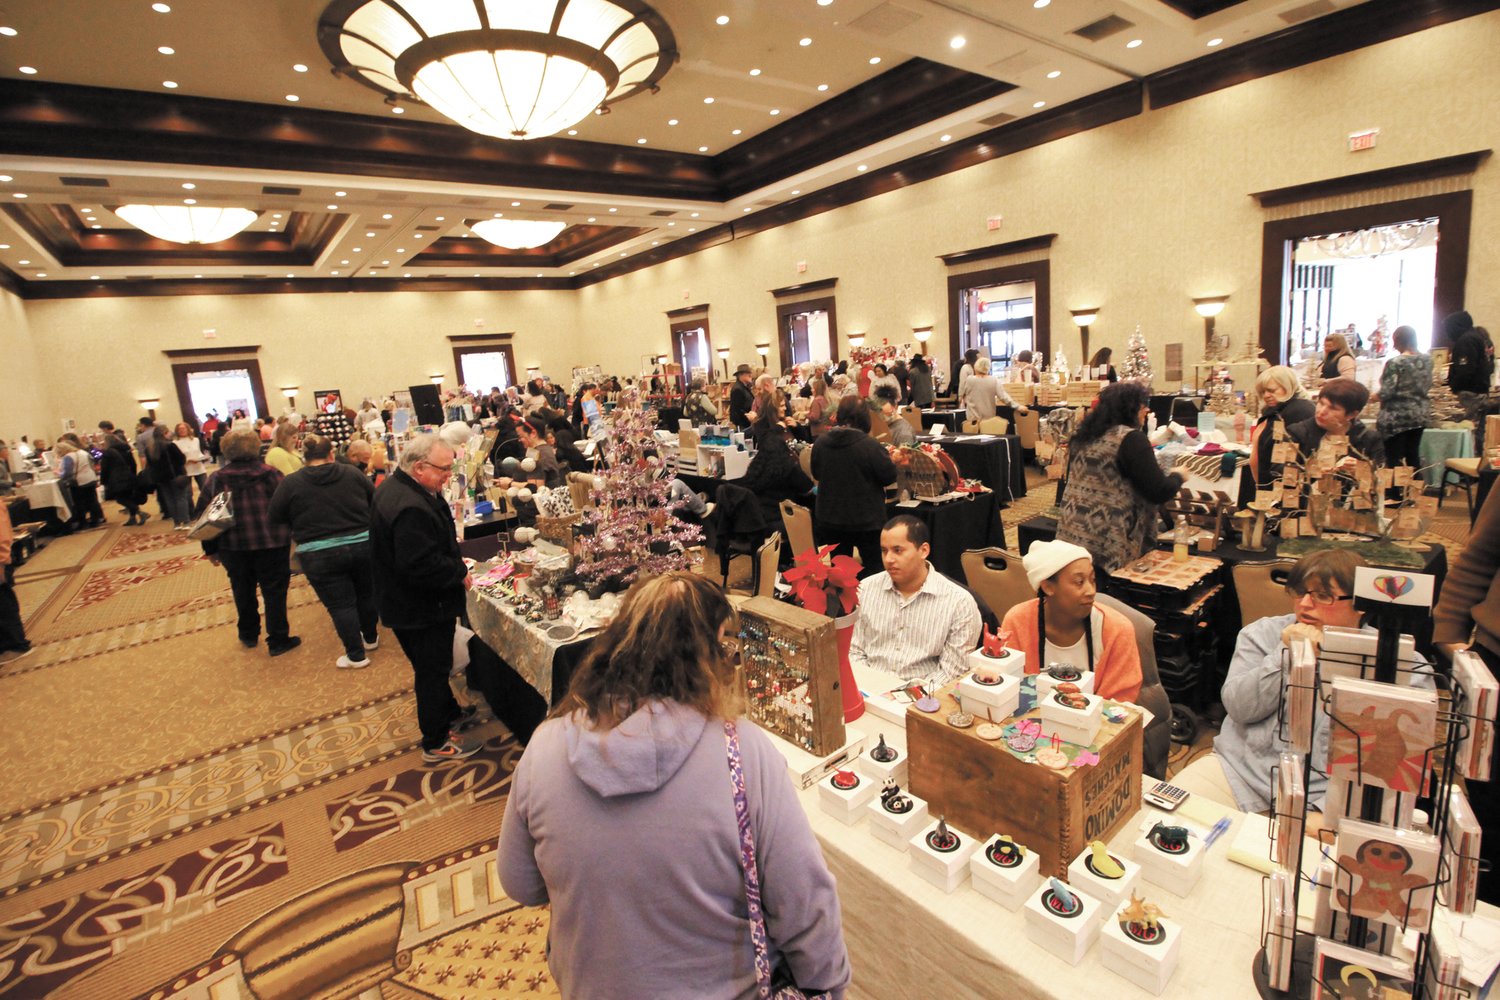 A FULL ROOM: The Grand ballroom at the Crowne Plaza was packed for Small Business Saturday. A total of 157 small businesses had displays at the event occupying several activity rooms at the hotel.